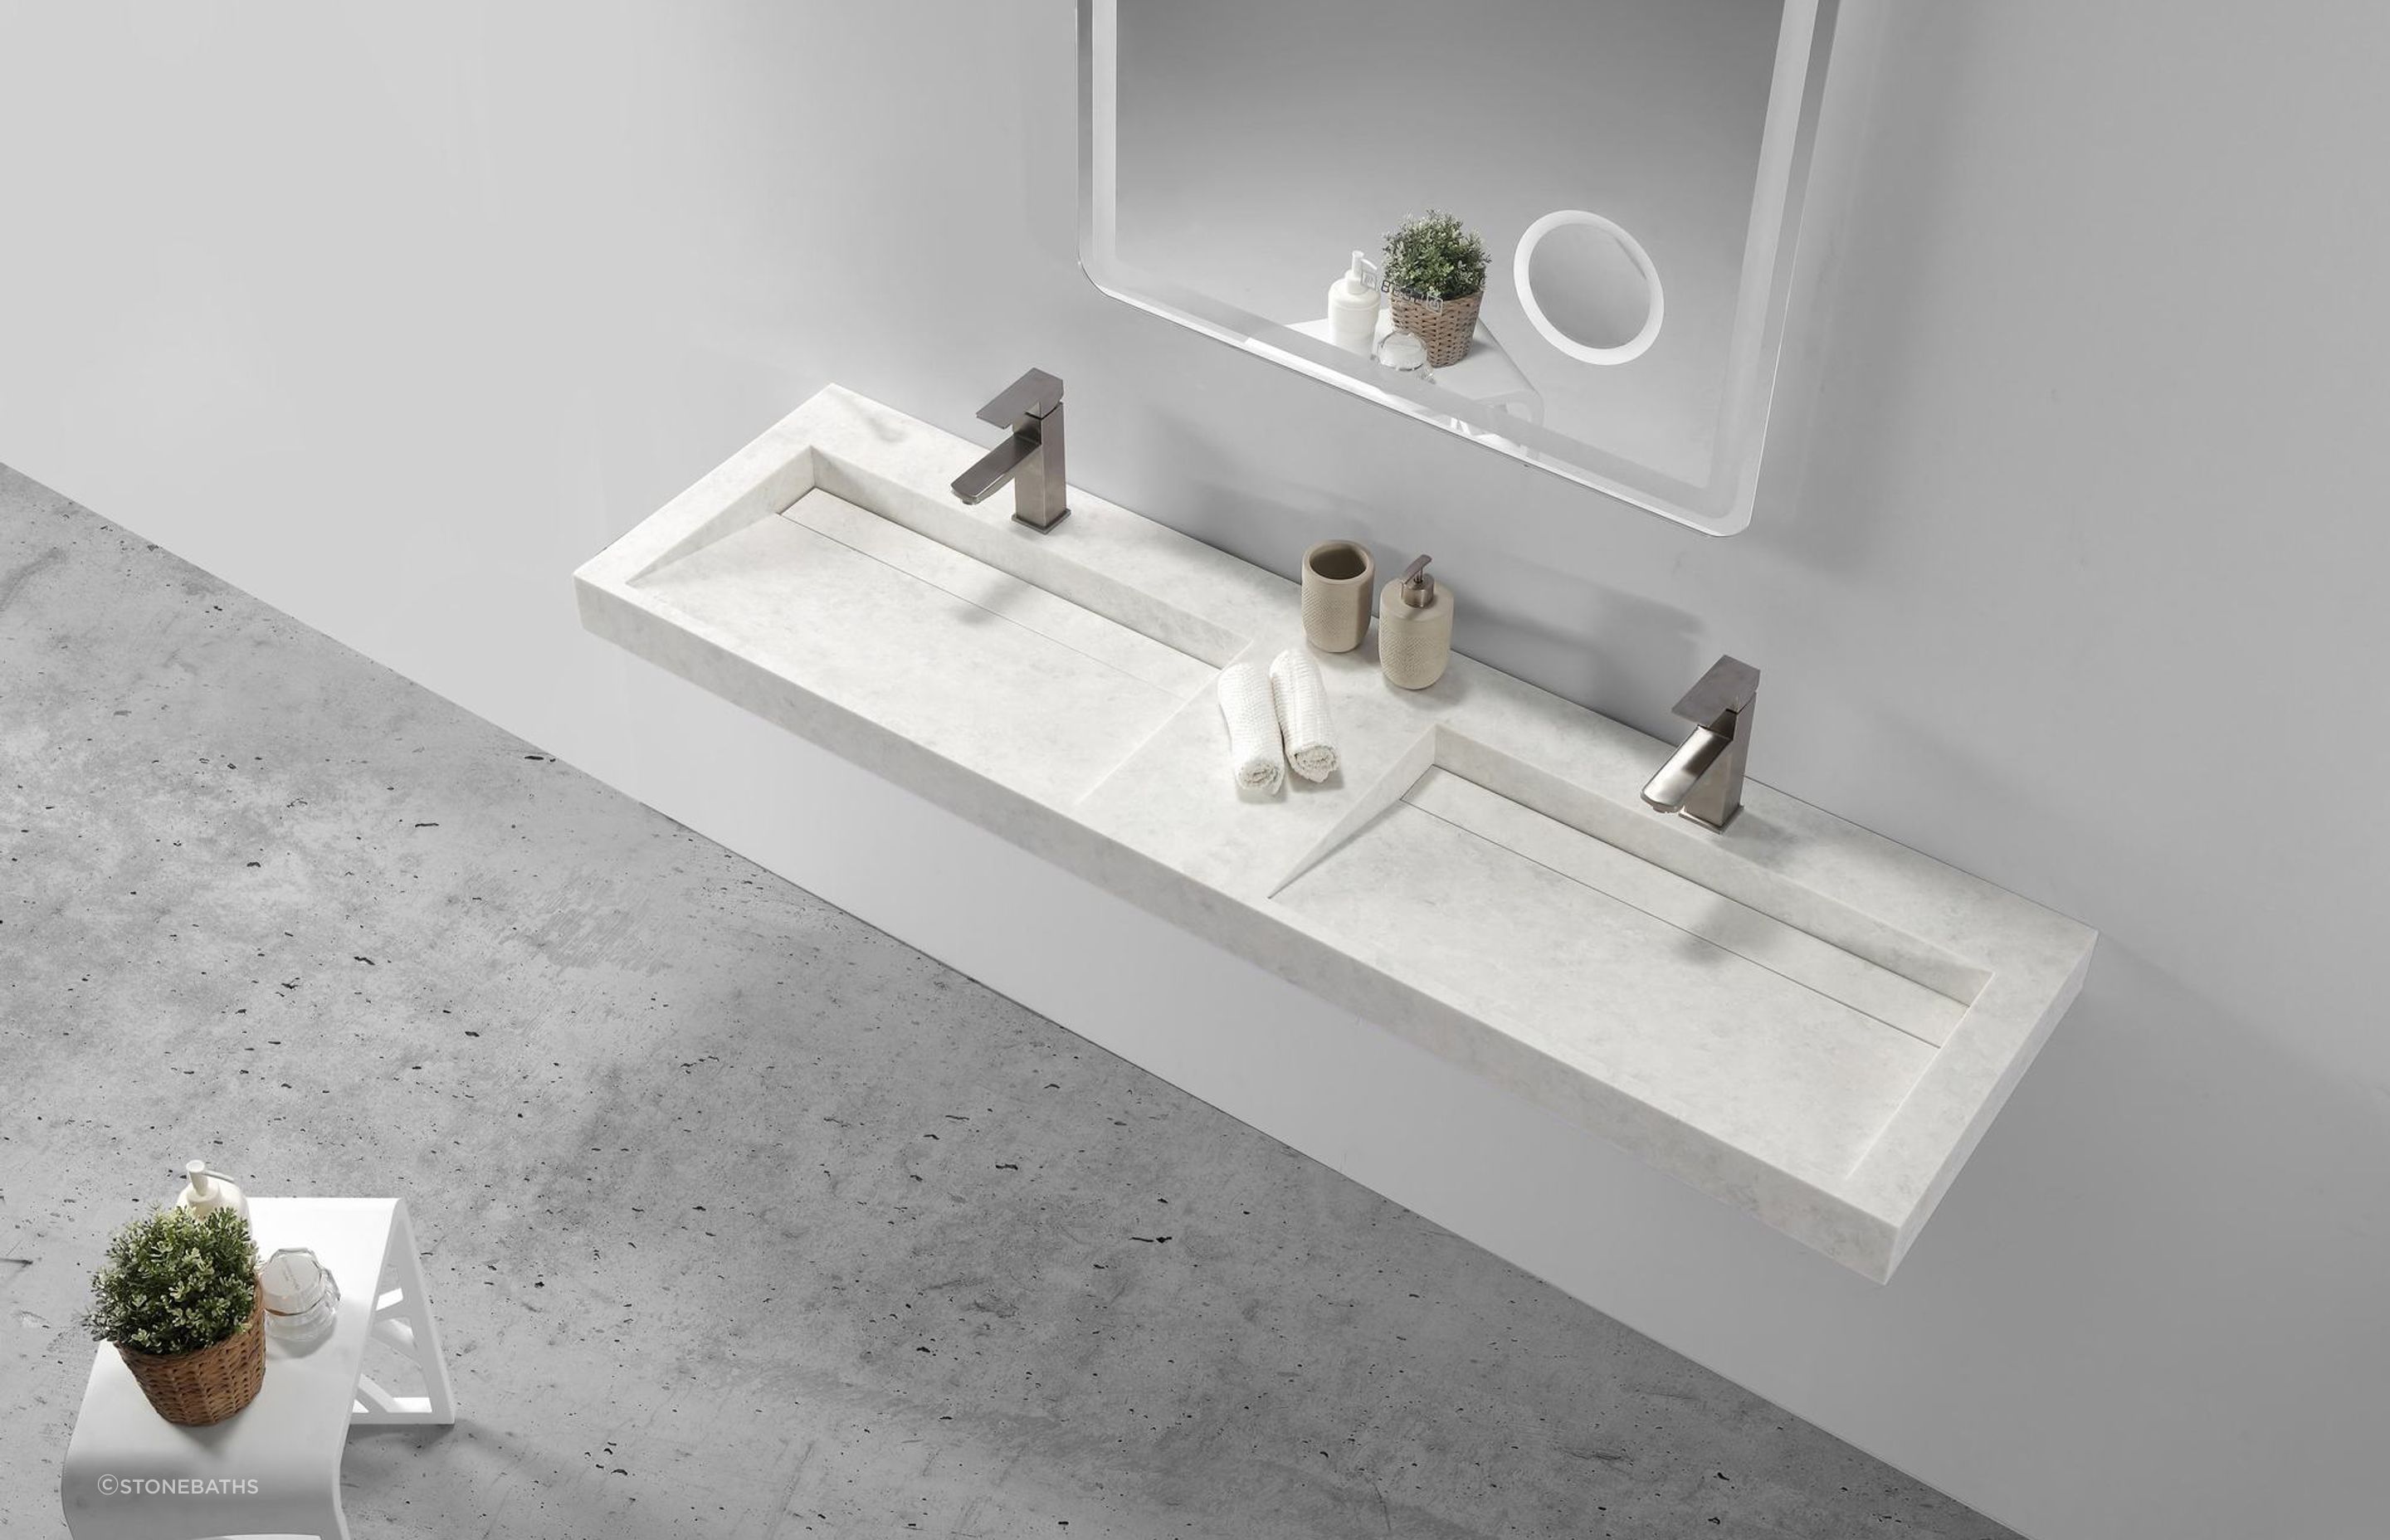 The B1266-2 Double Basin in polymarble from Stonebaths